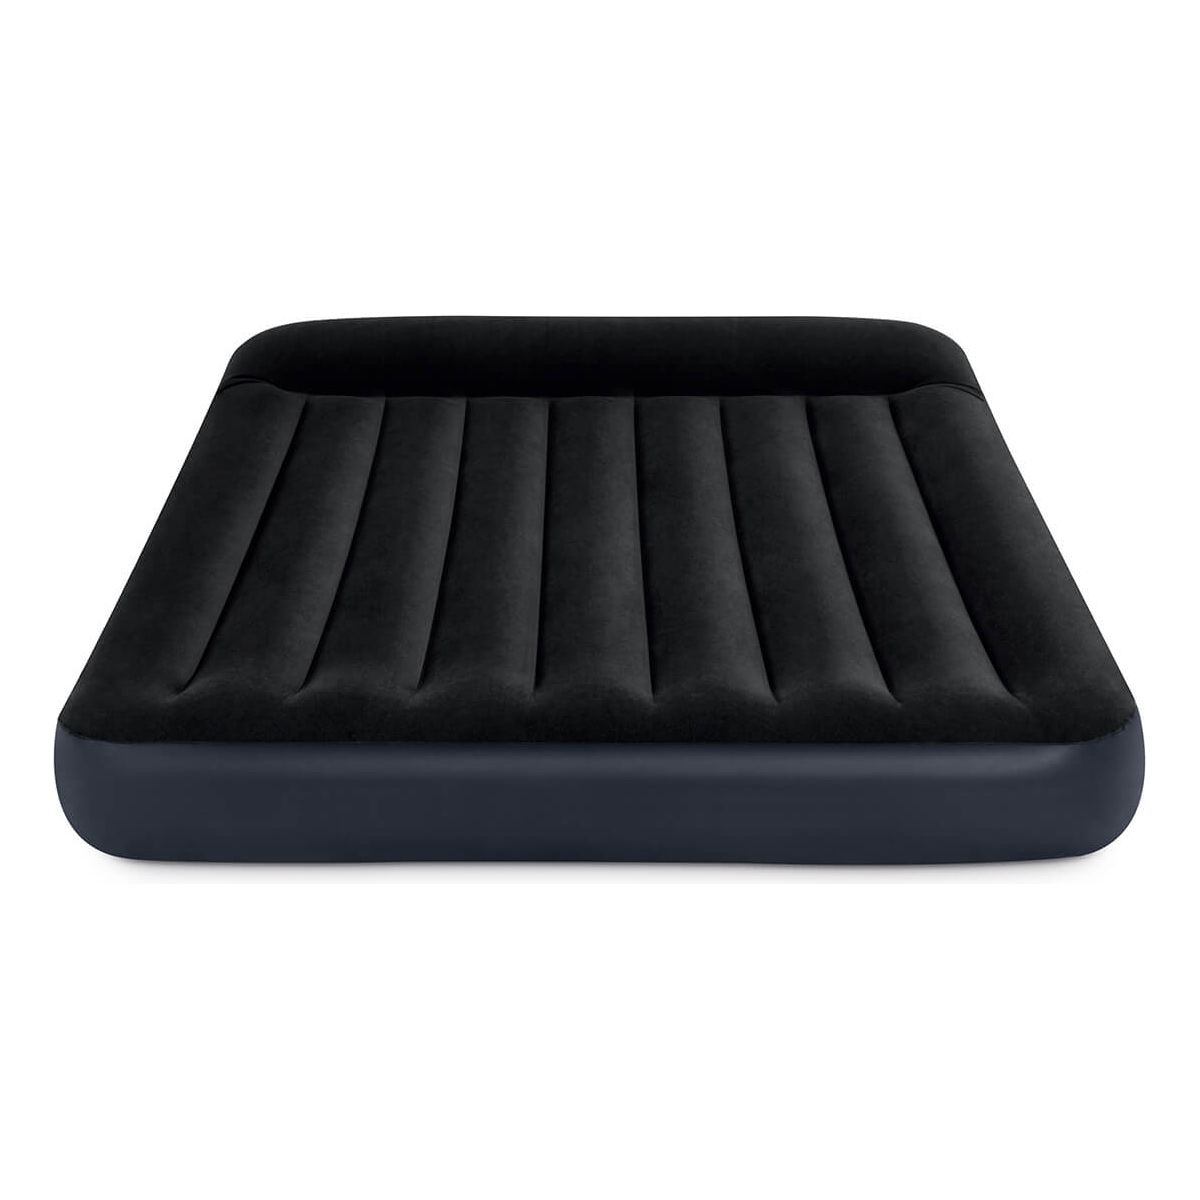 Intex - Pillow Rest luchtbed - tweepersoons